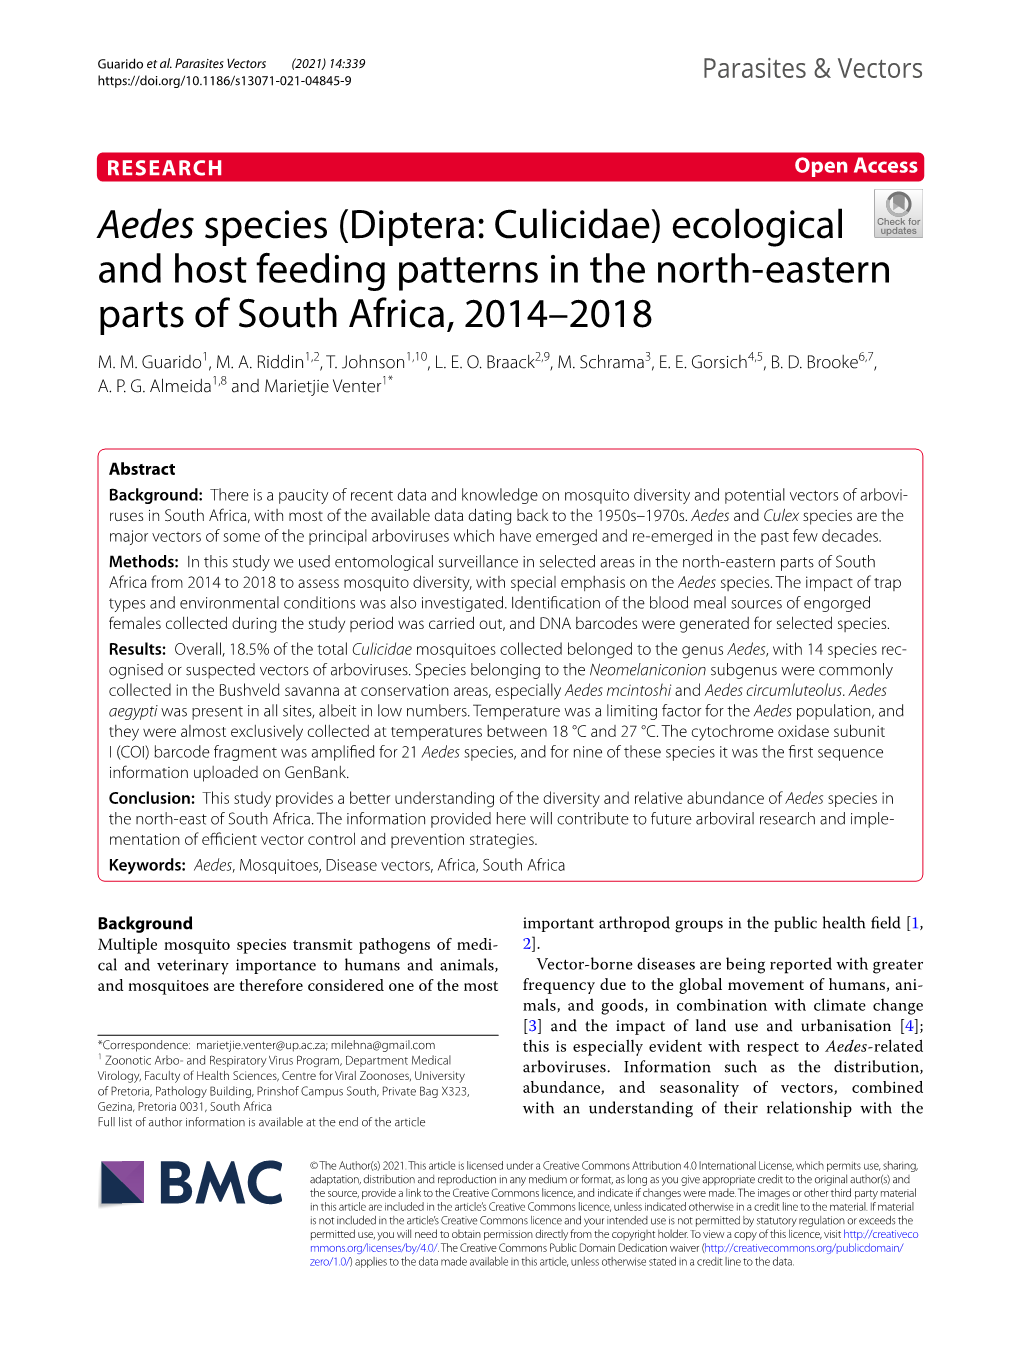 Aedes Species (Diptera: Culicidae) Ecological and Host Feeding Patterns in the North‑Eastern Parts of South Africa, 2014–2018 M